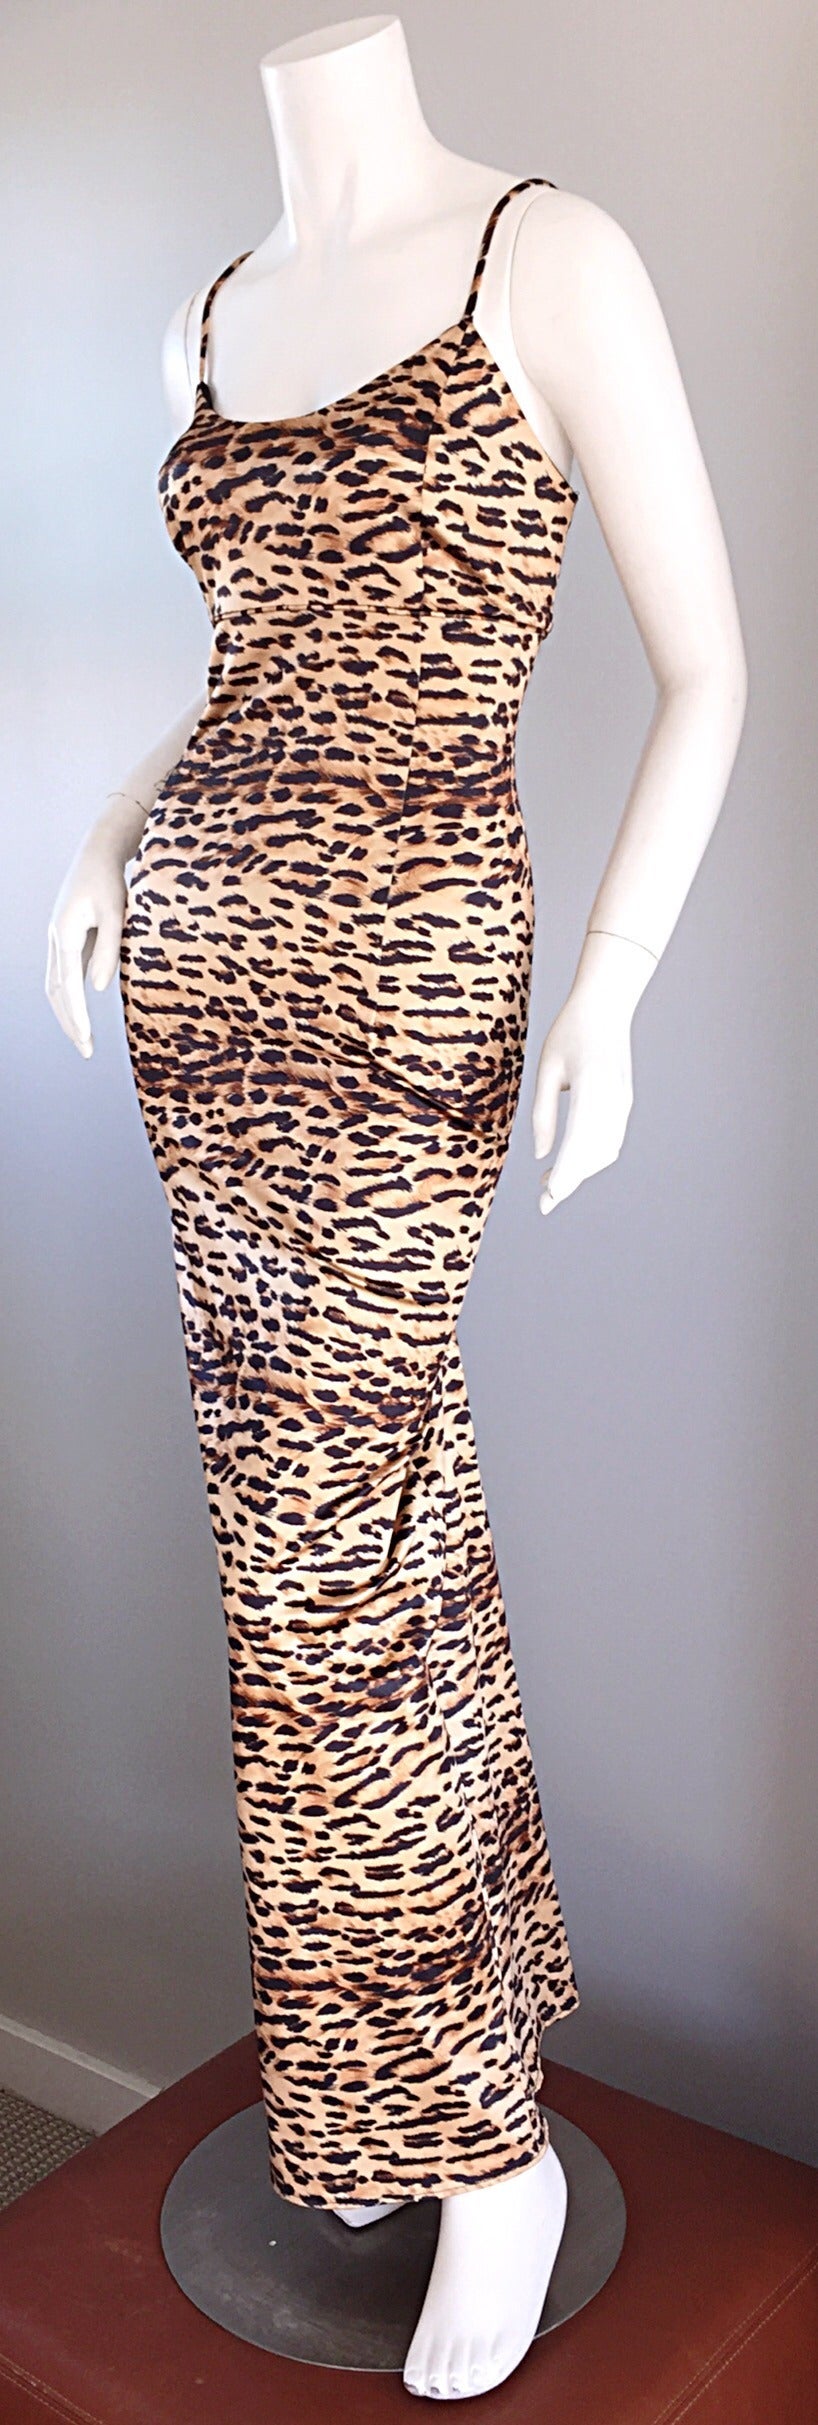 Women's Iconic and Rare 1990s Dolce & Gabbana Leopard Print Vintage Bodycon Dress